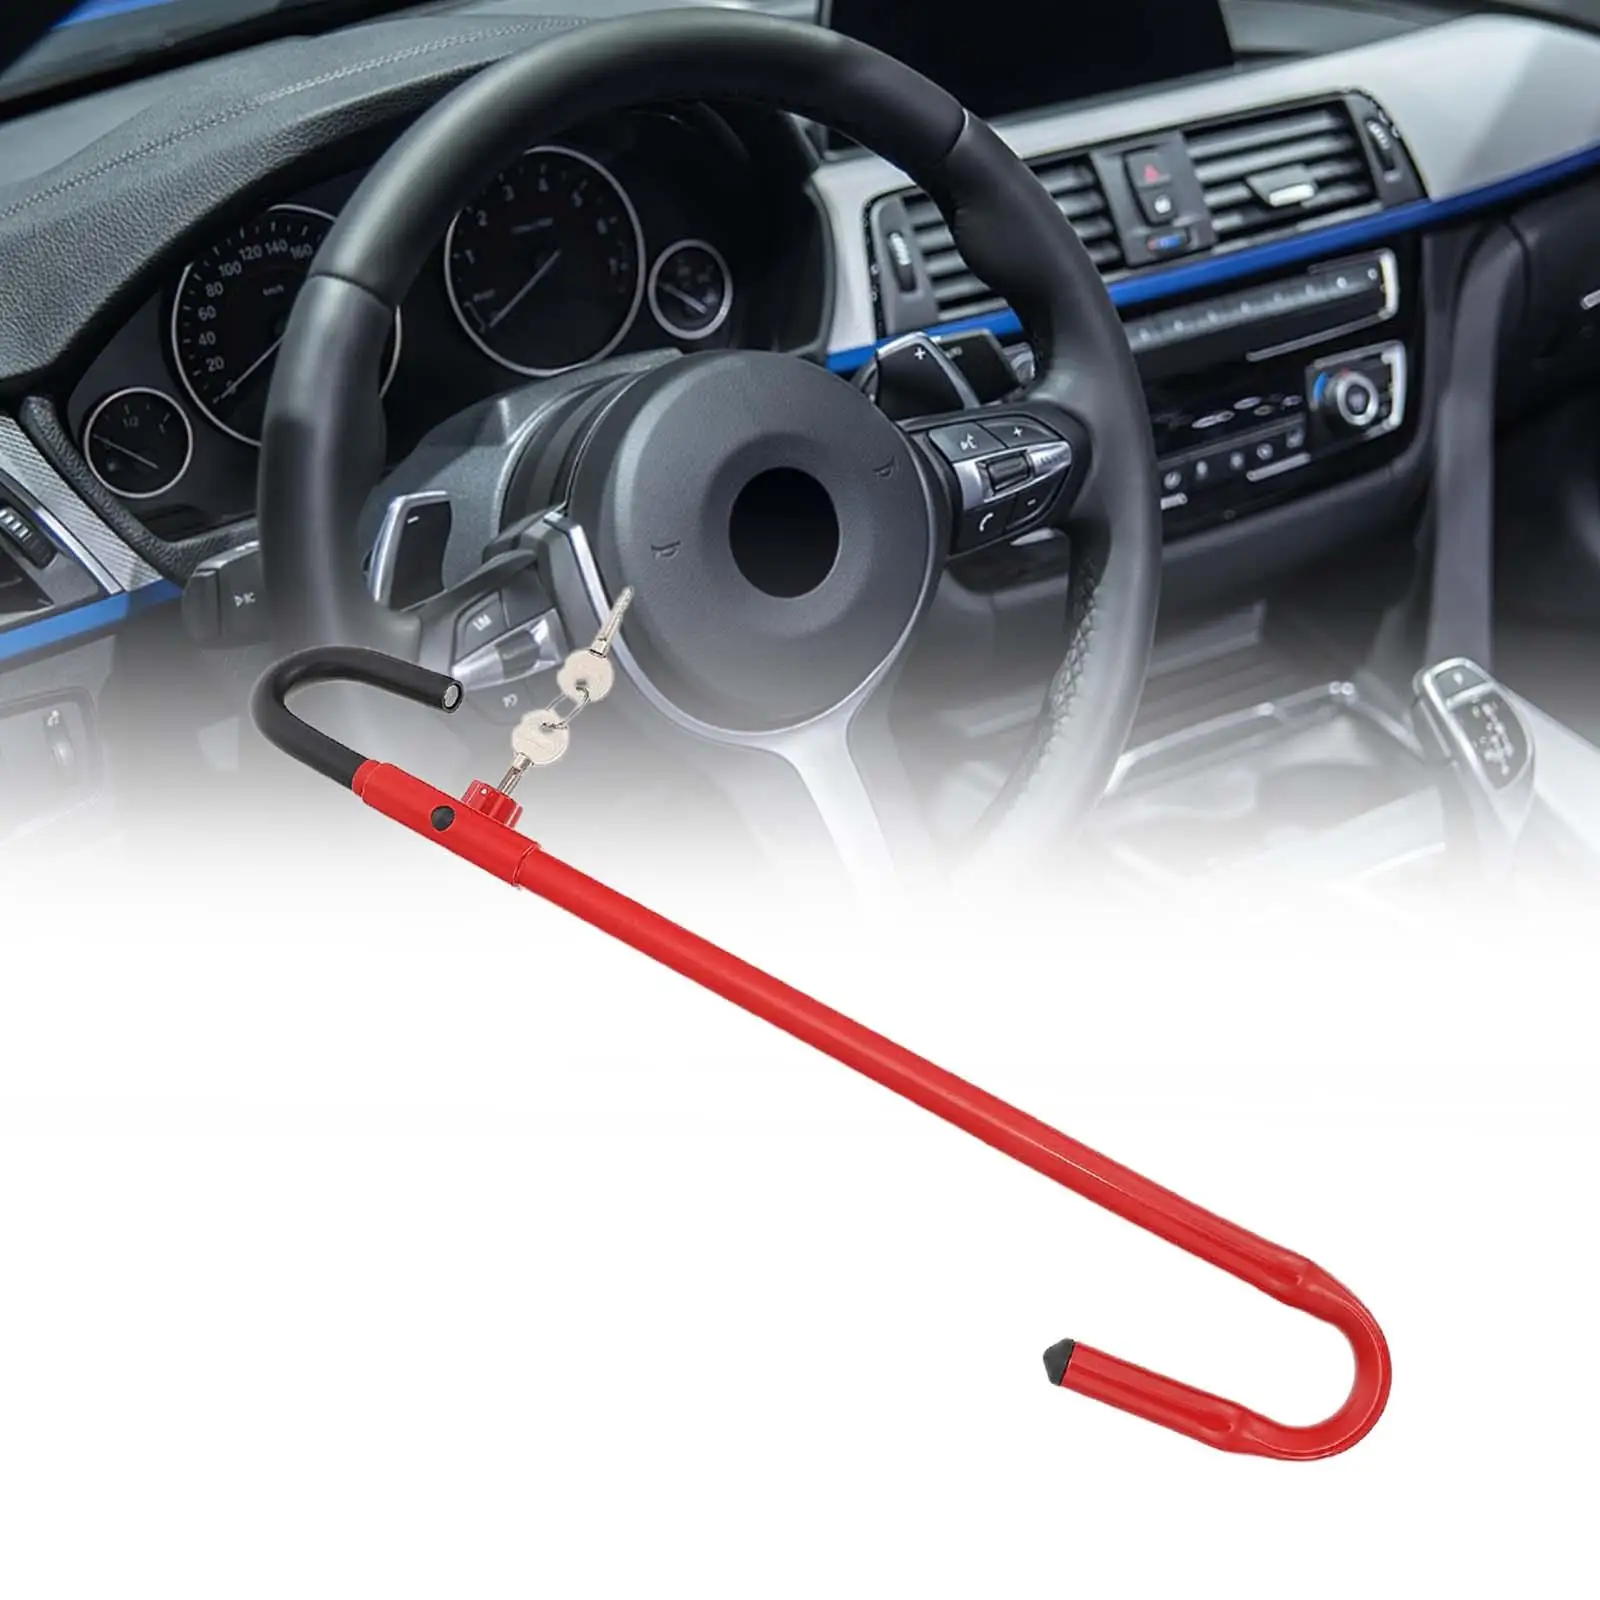 Car Steering Wheel to Brake Pedal Lock Accessory for Automobile SUV Car